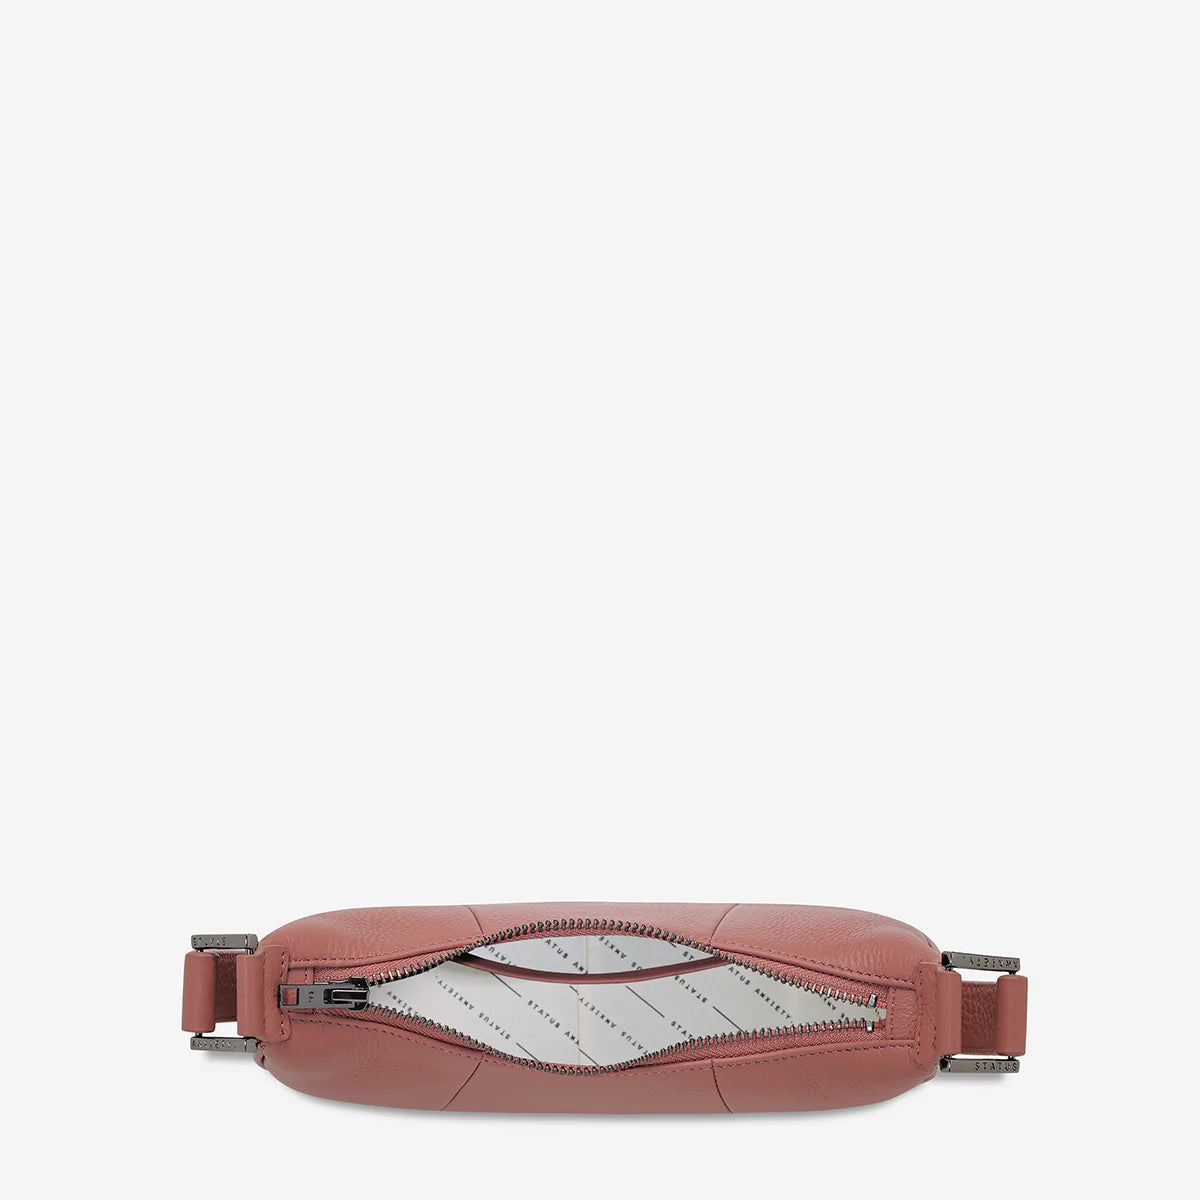 Status Anxiety Solus Bag - Dusty Rose